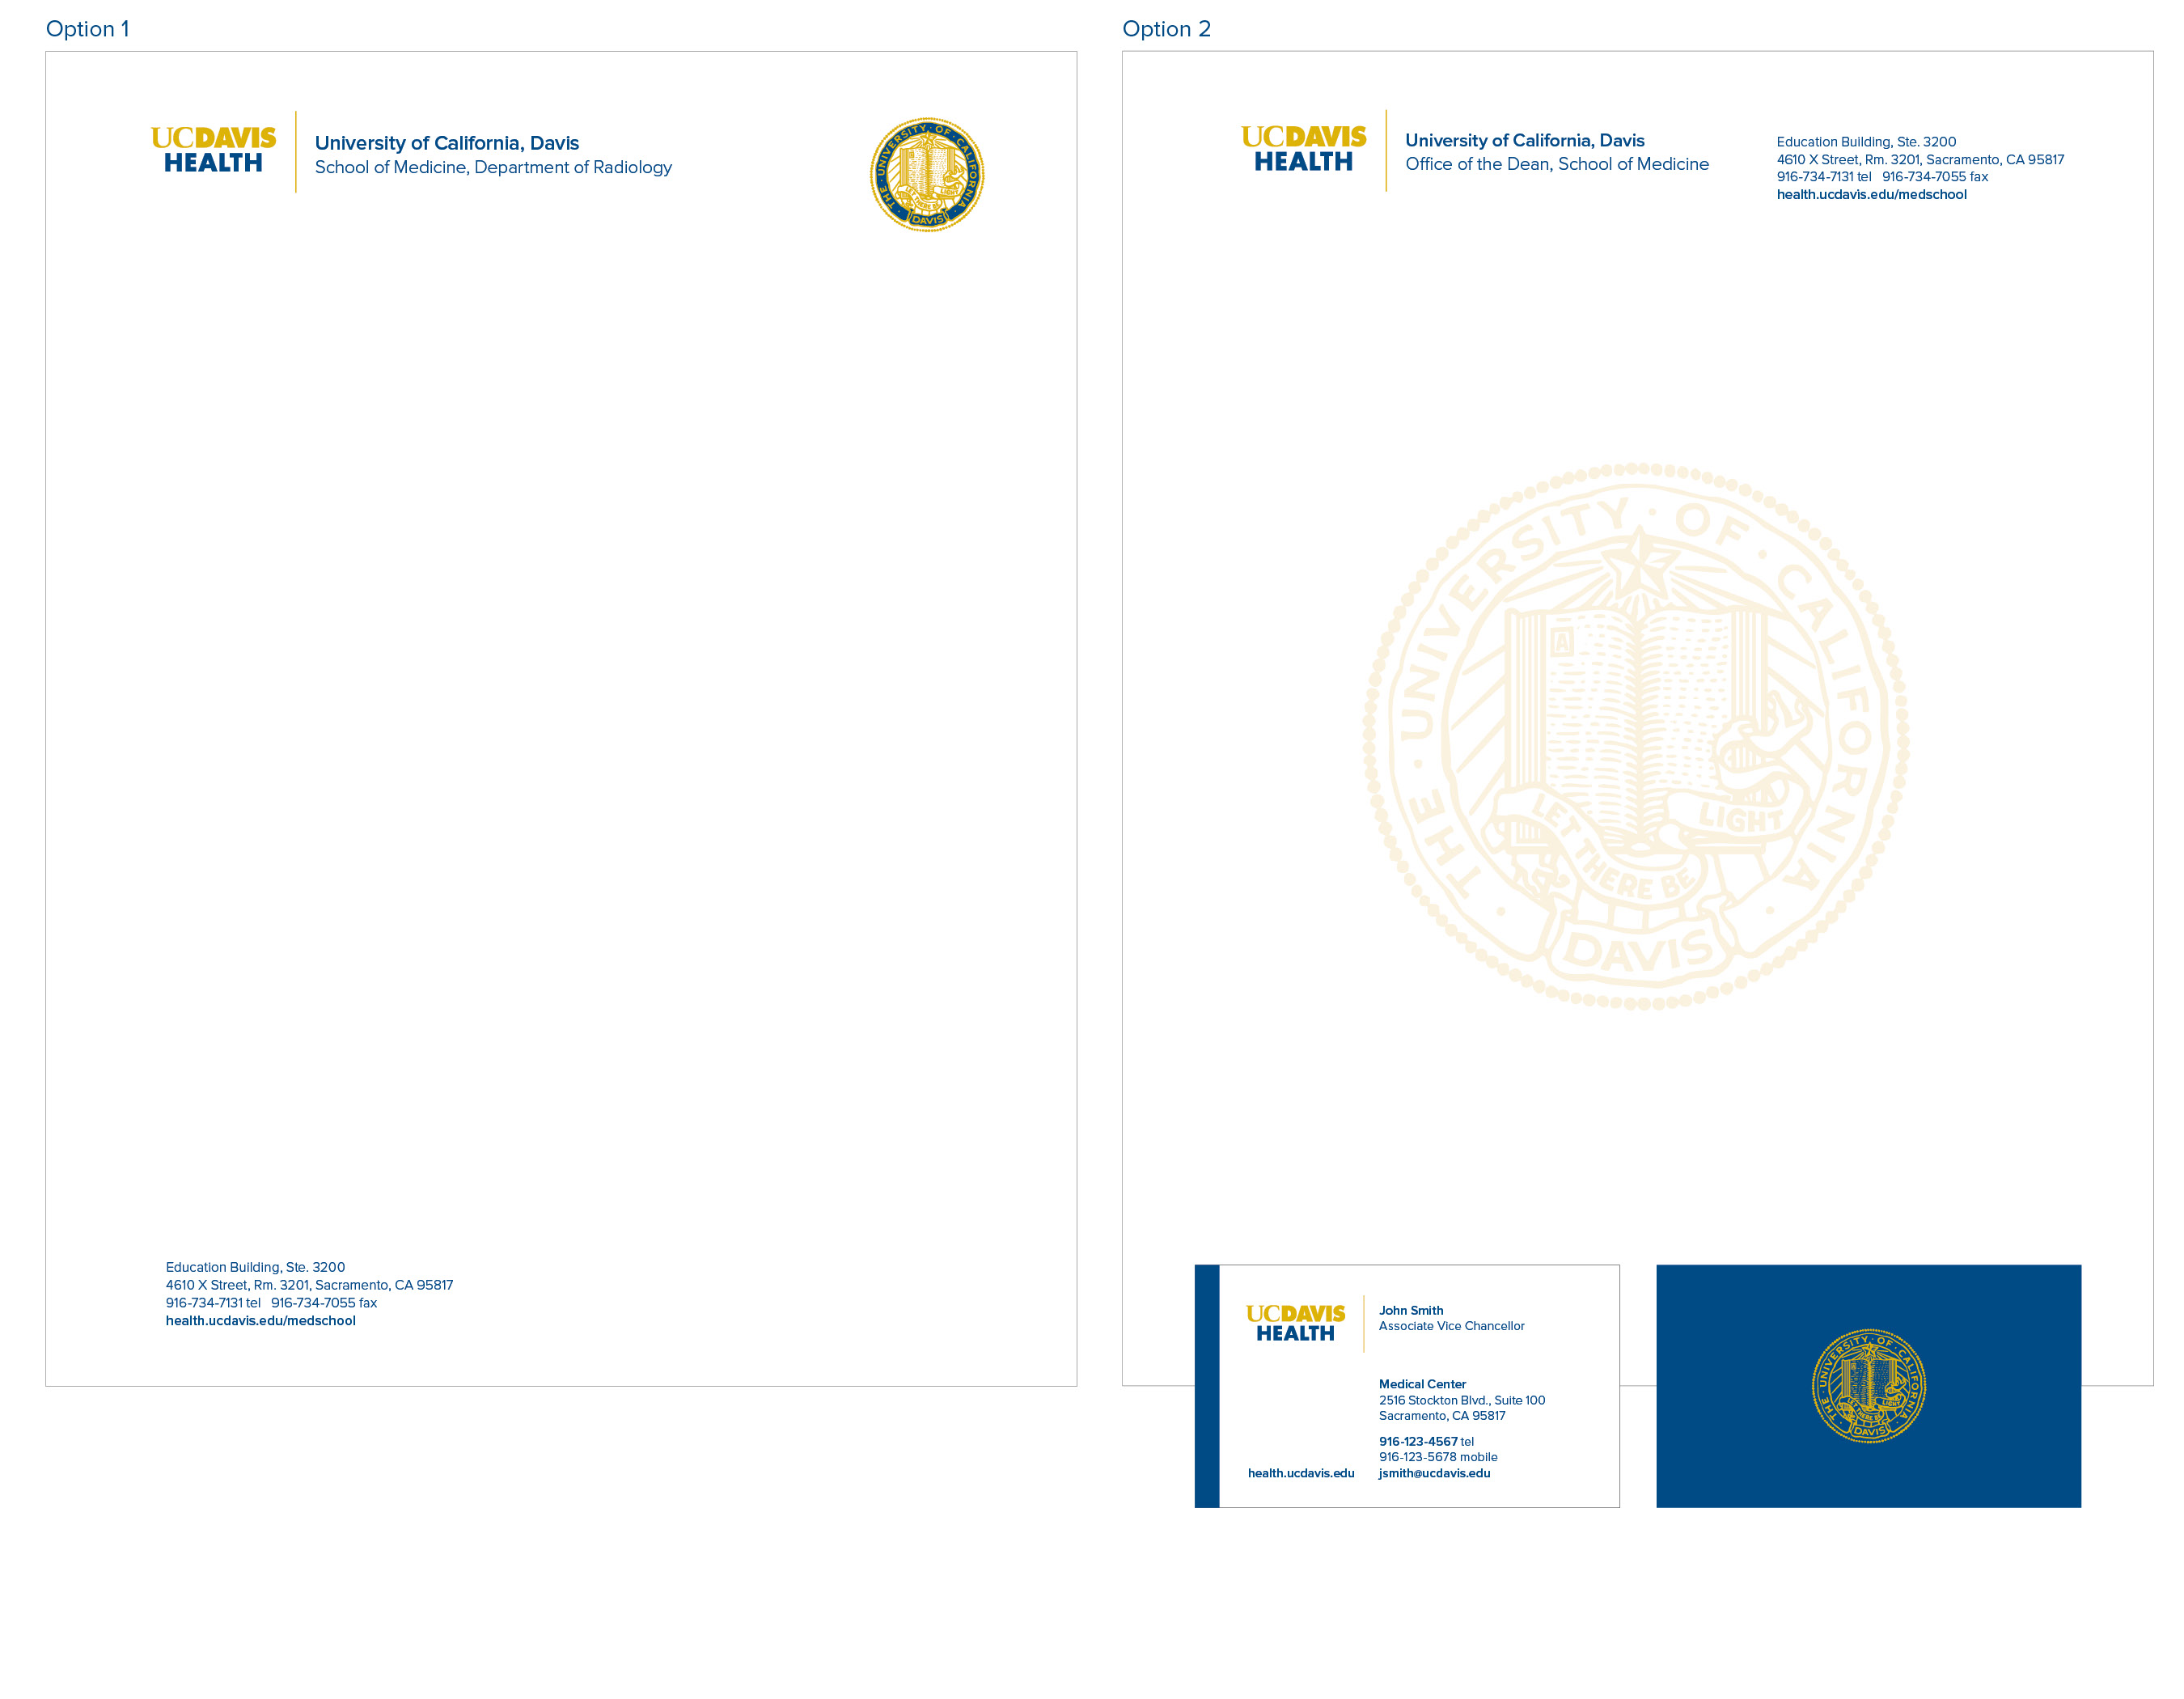 Examples of academic department letterheads with seal